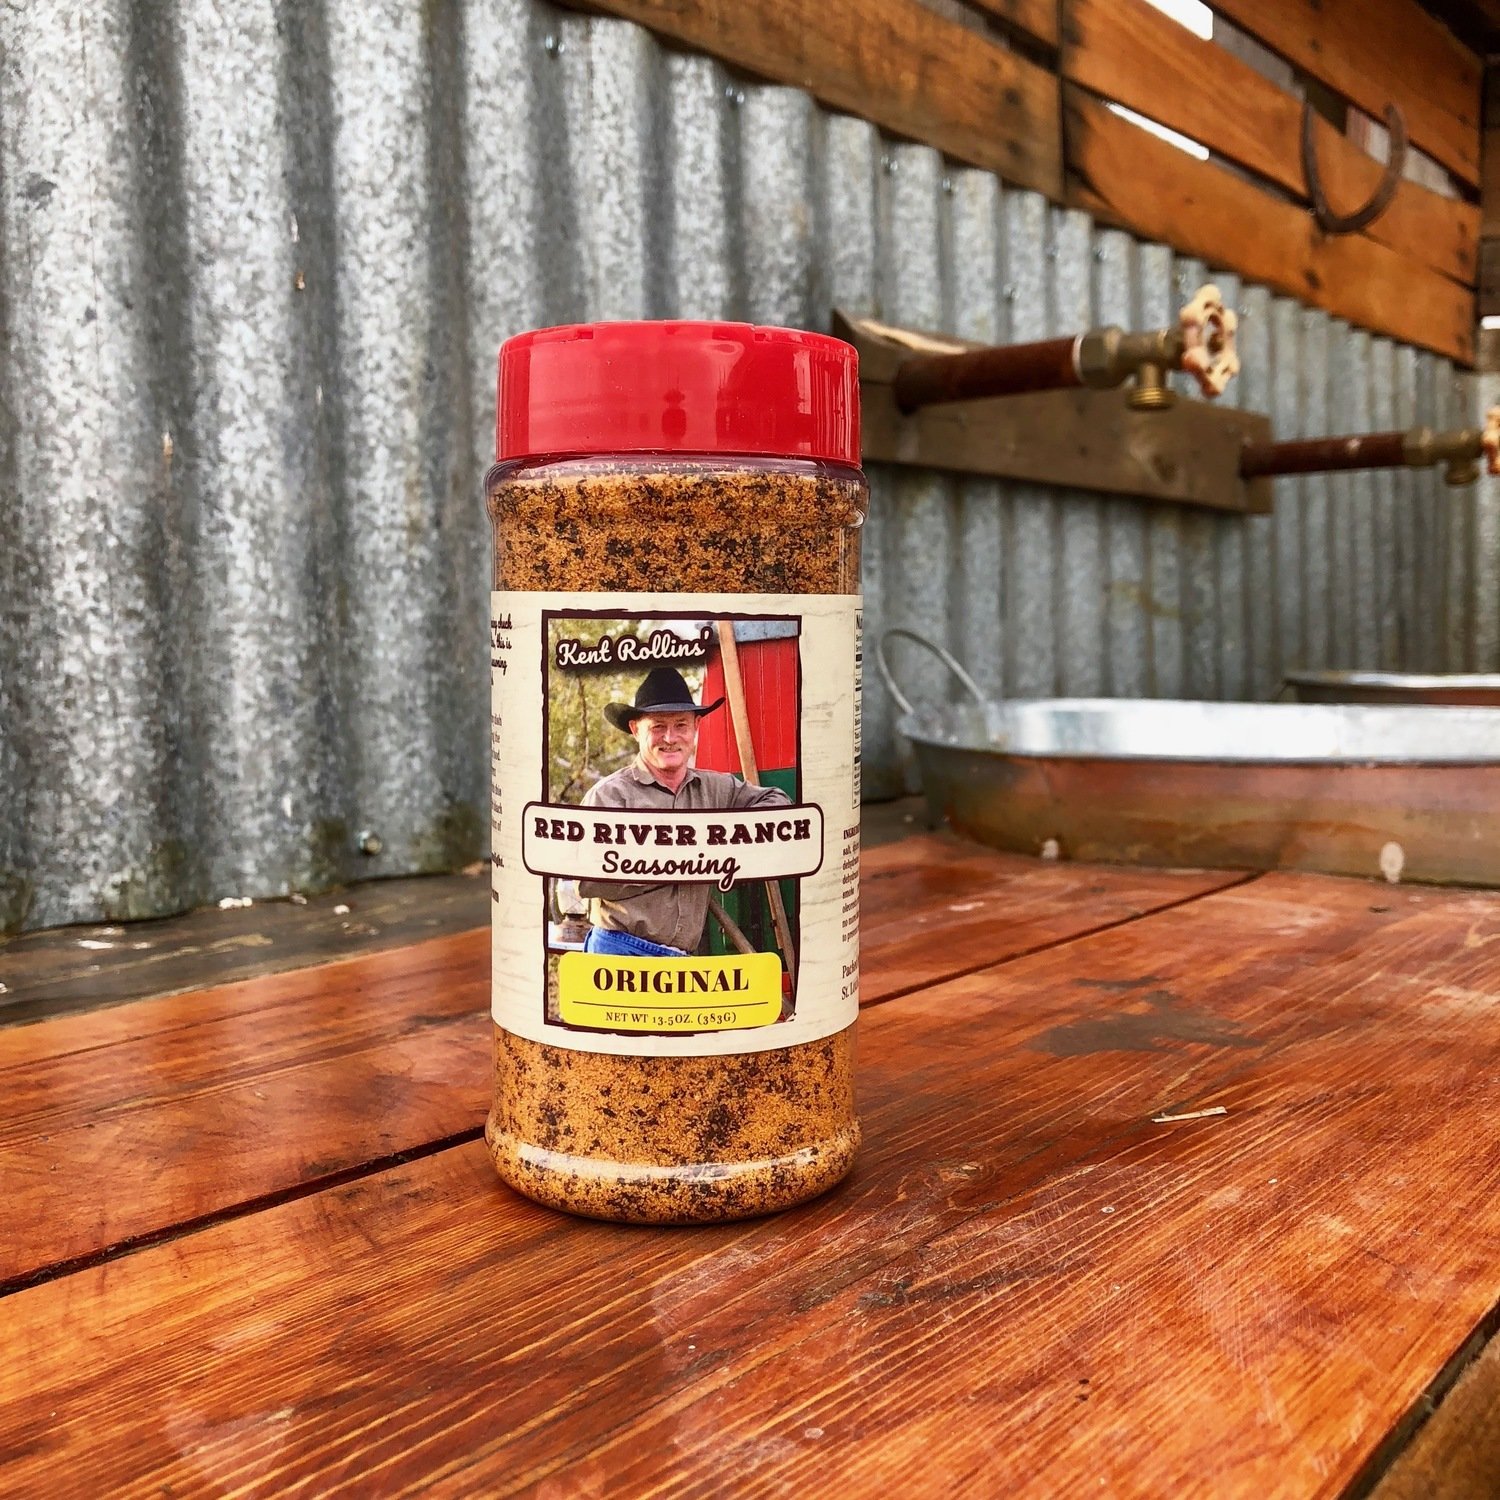 Twitter 上的Kent we got our original seasoning for ONLY This seasoning really was made as a steak rub, but folks just can't help but use it on just